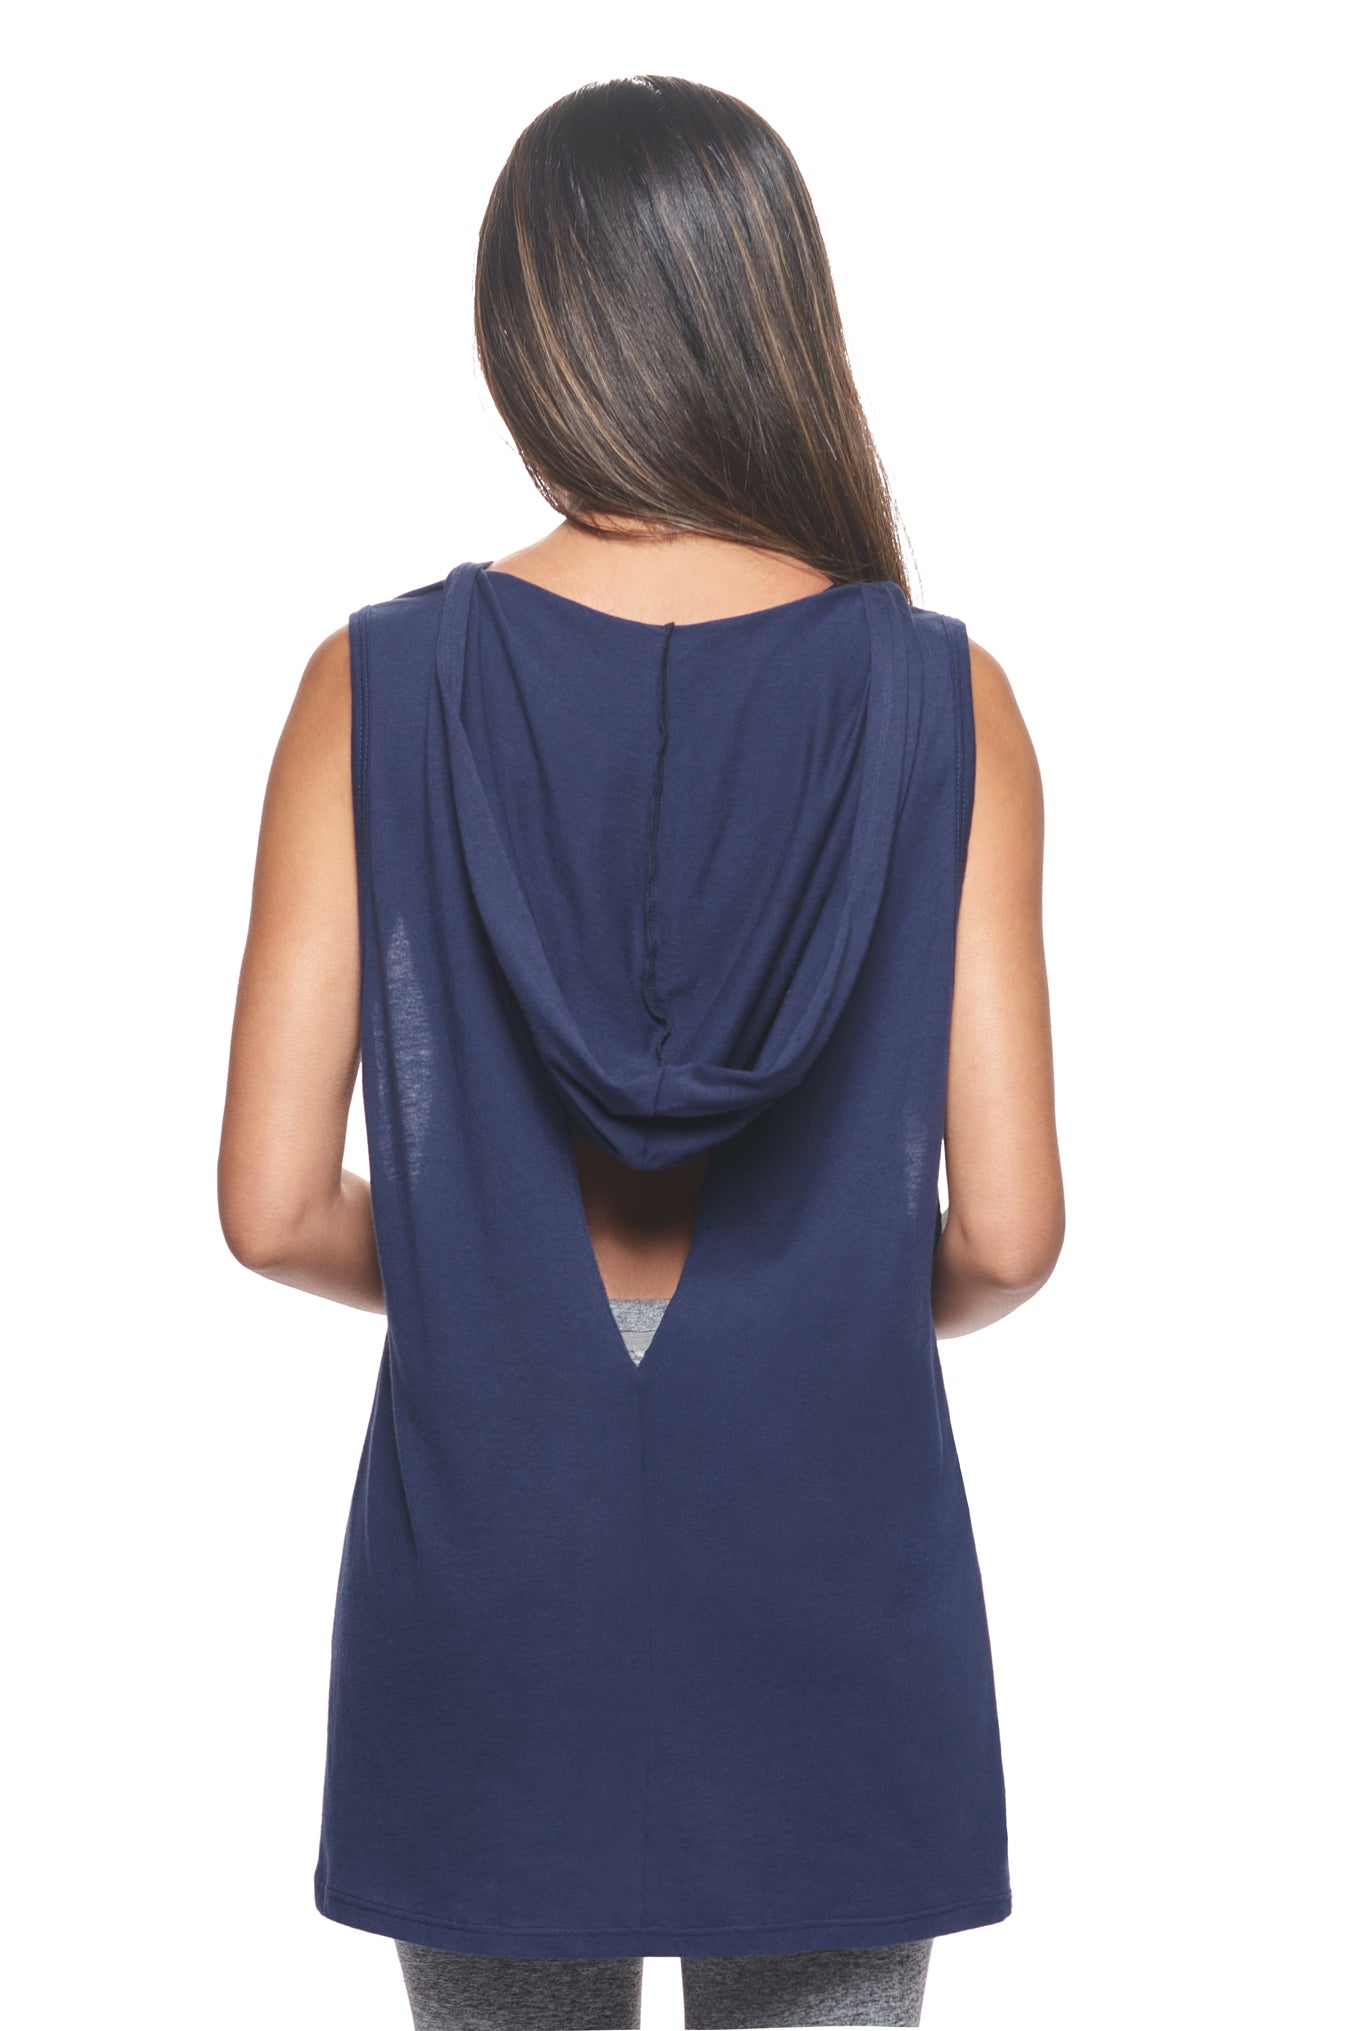 Expert Brand Wholesale Sustainable Eco-Friendly Apparel Micromodal Organic Cotton Moca Women's Sleeveless Hoodie Made in USA Navy 3#navy